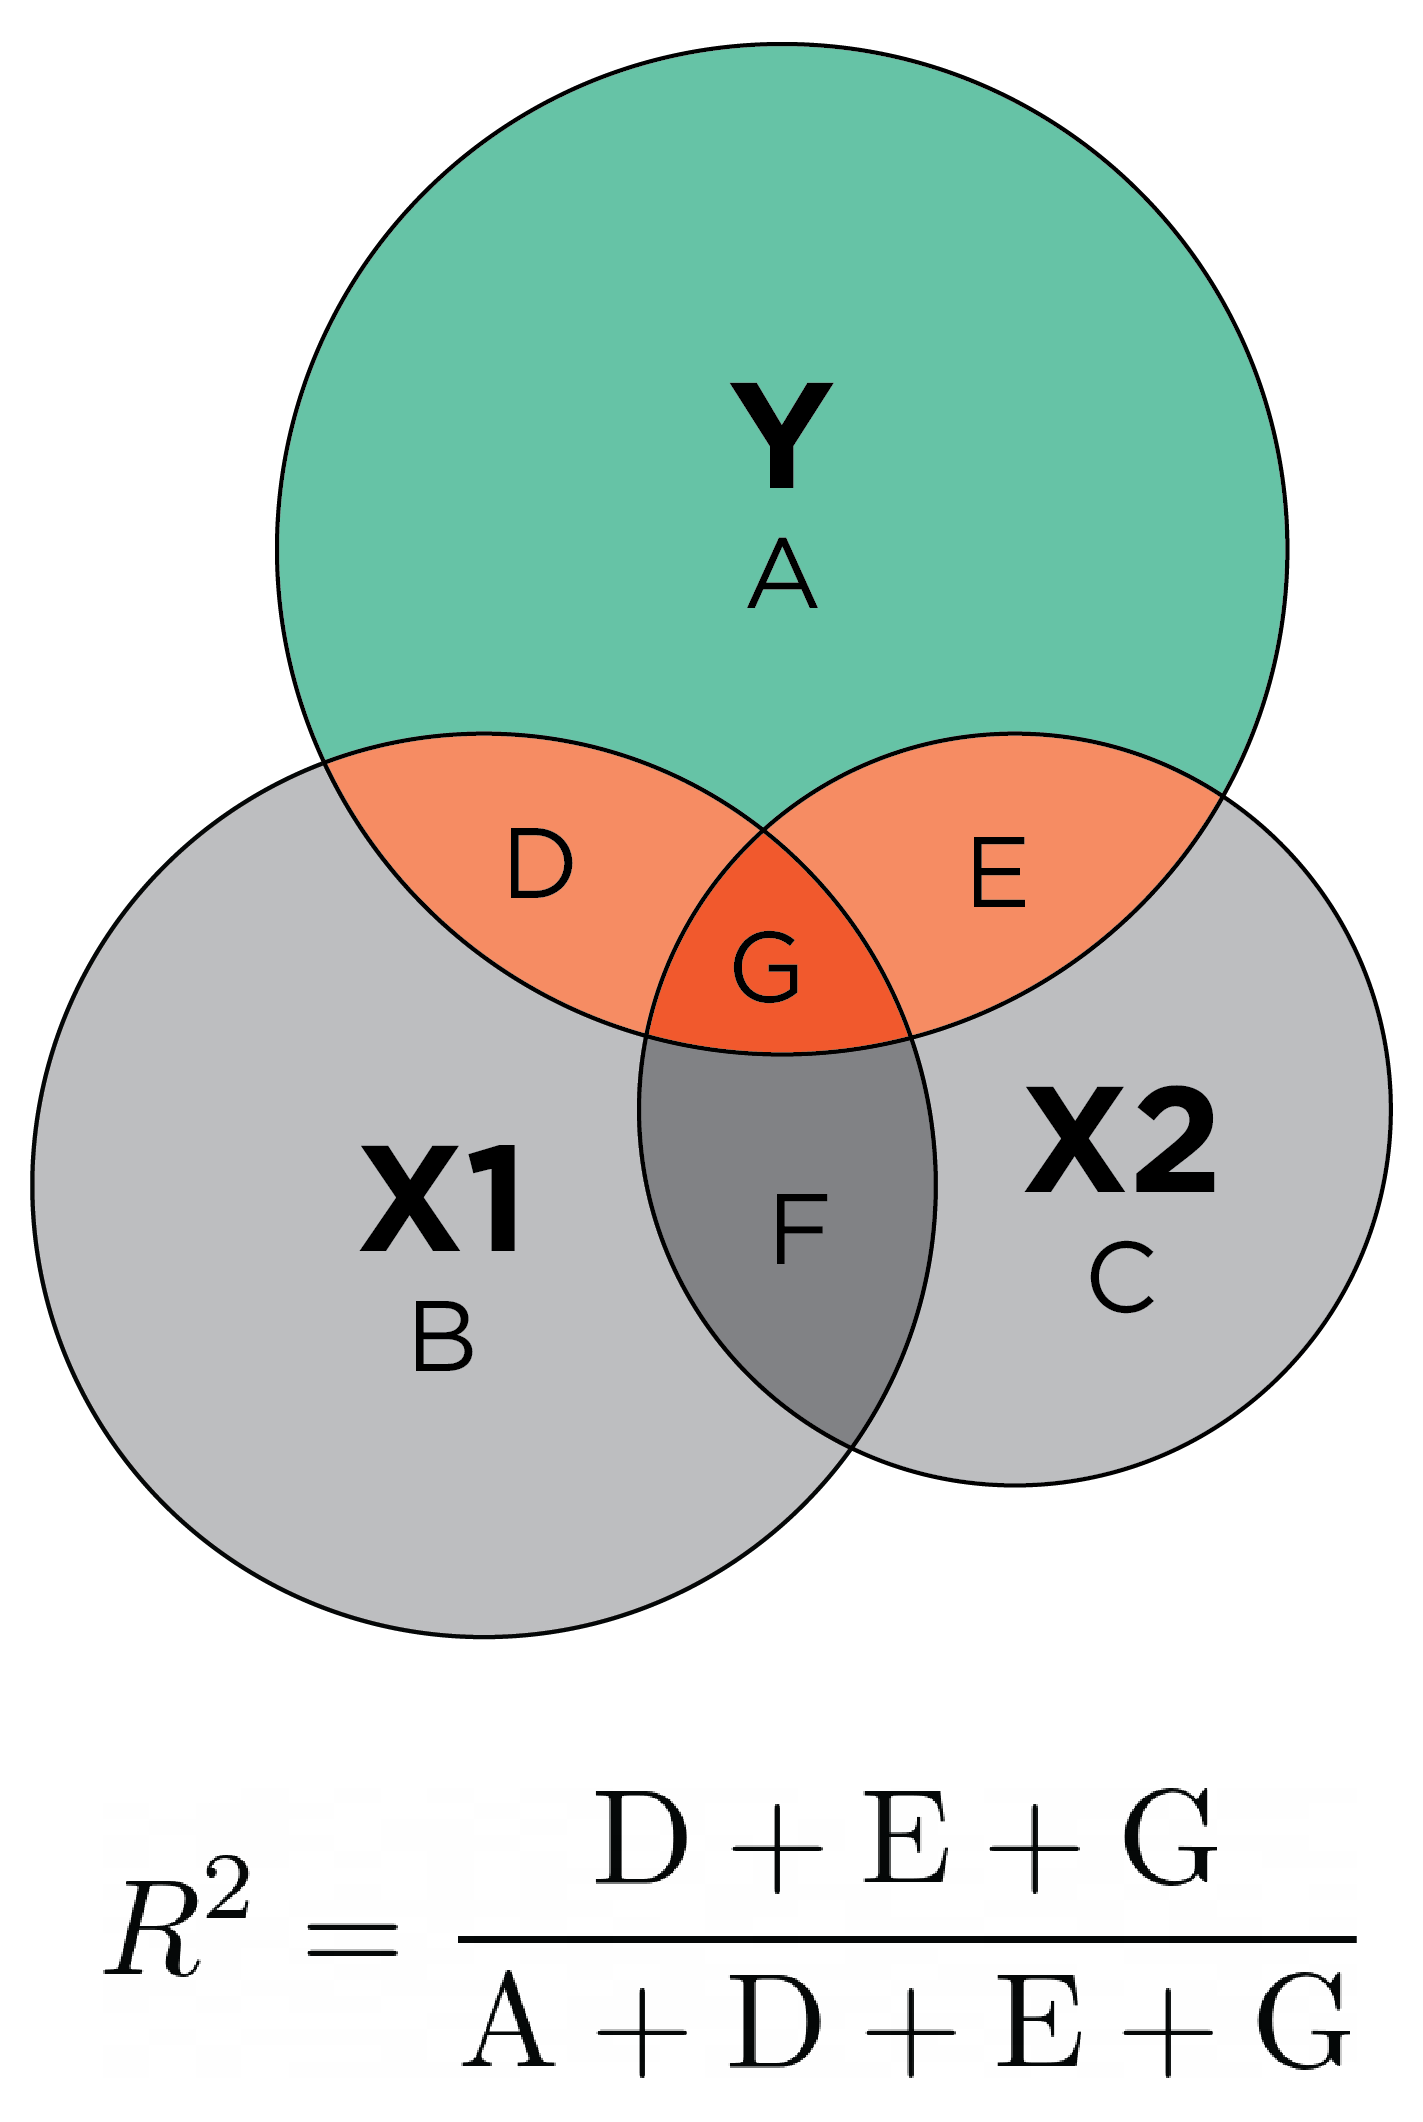 Conceptual Depiction of Proportion of Variance Explained ($R^2$) in an Outcome Variable ($Y$) by Multiple Predictors ($X1$ and $X2$) in Multiple Regression. The size of each circle represents the variable's variance. The proportion of variance in $Y$ that is explained by the predictors is depicted by the areas in orange. The dark orange space ($G$) is where multiple predictors explain overlapping variance in the outcome. Overlapping variance that is explained in the outcome ($G$) will not be recovered in the regression coefficients when both predictors are included in the regression model.